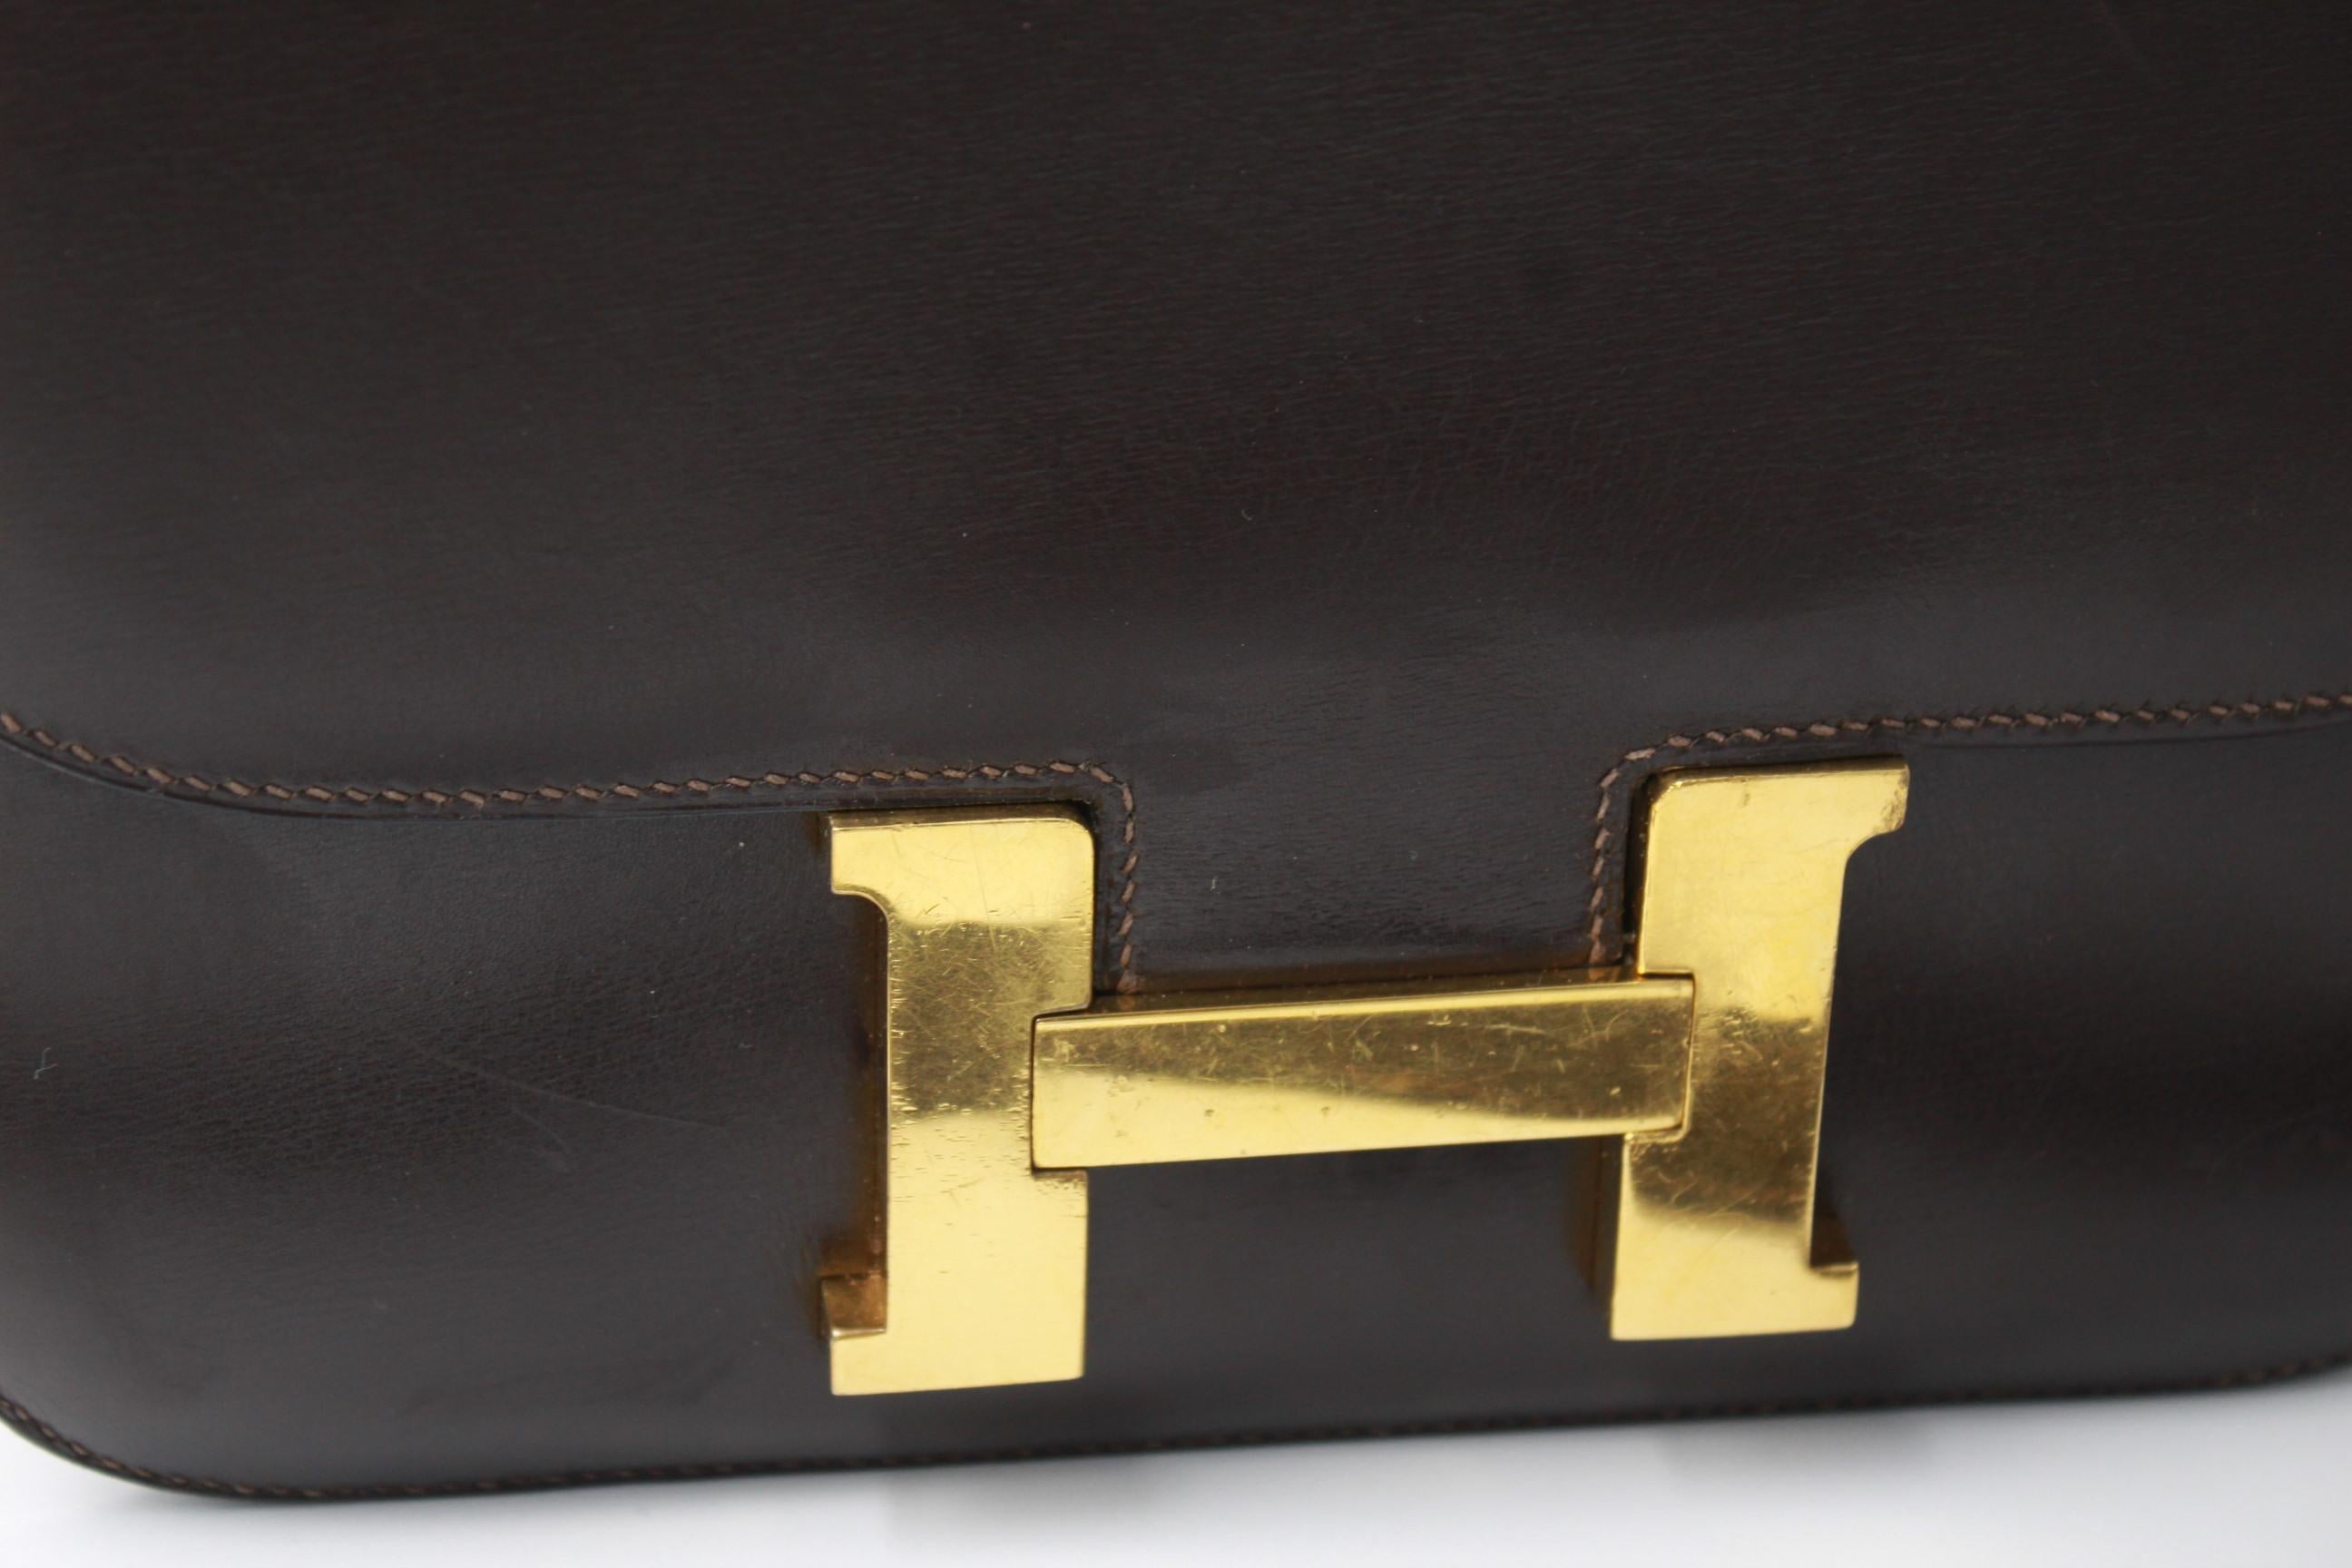 Nice vintage Hermes Constance bag in brown box leather.

Vintage bag in good vintage coondition, leather not cracked. Some signs of wear in the hardware and sttrap ( light cracking on the strap)

Size 23 cm